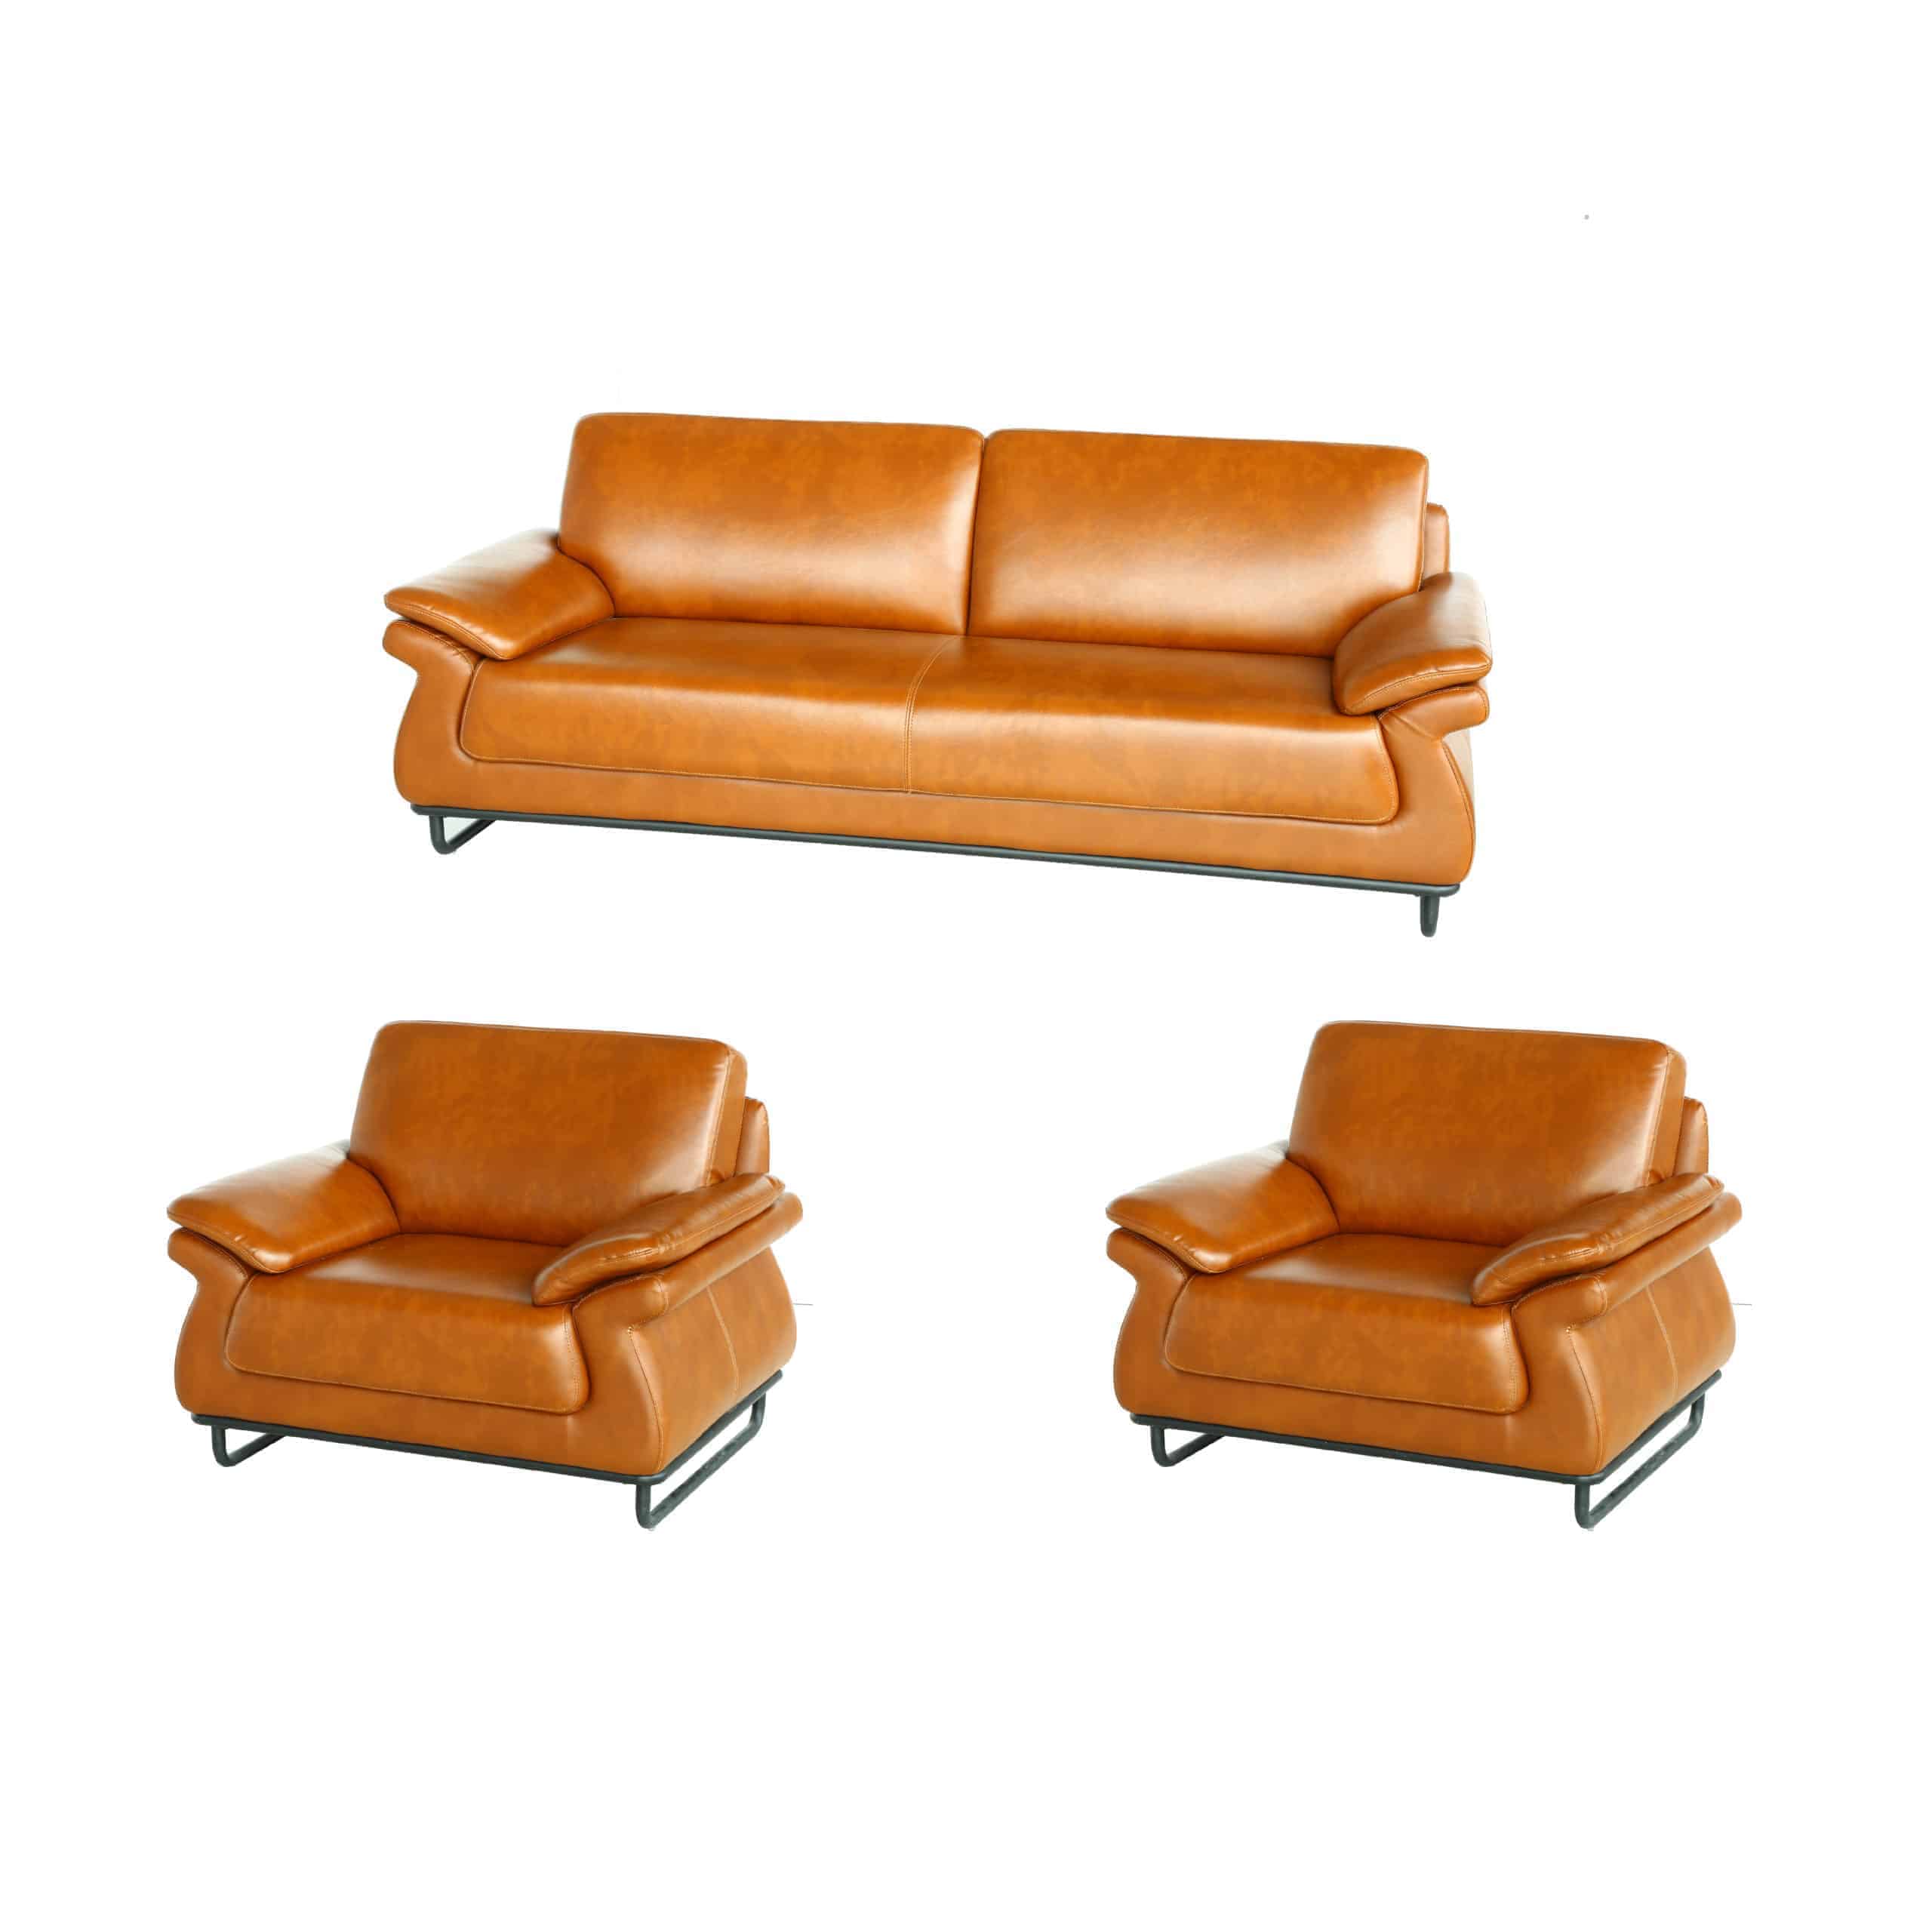 Two plus two single seater light brown colour seat foam and back foam hospital waiting room sofa